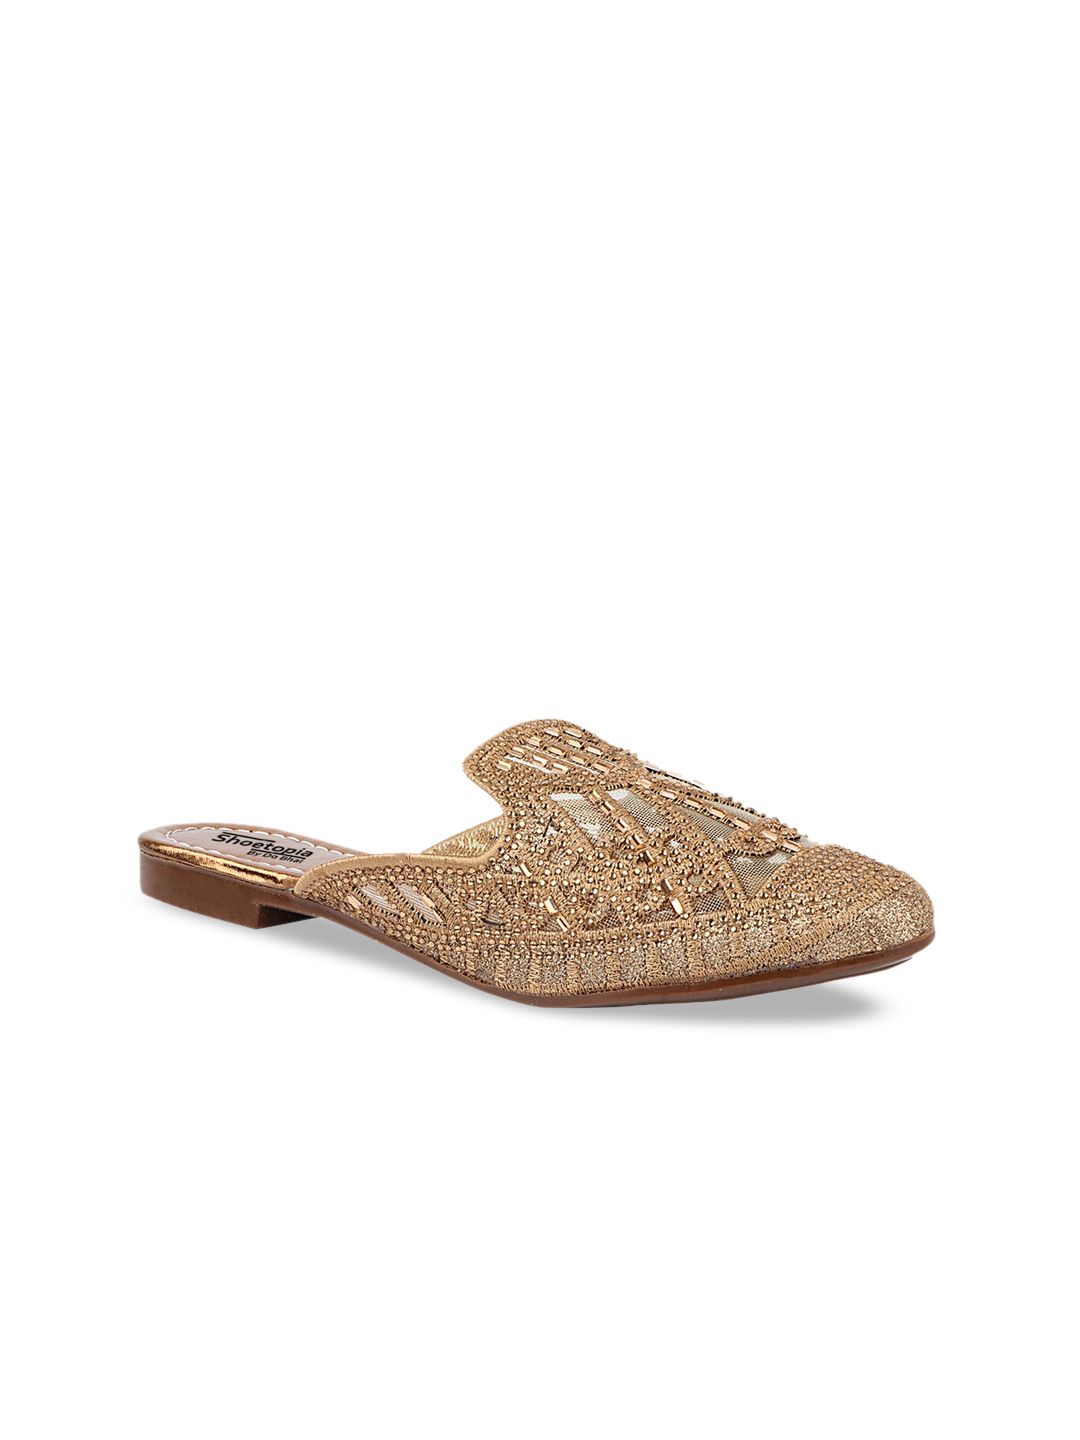 Shoetopia Women Copper-Toned Embellished Mules Price in India